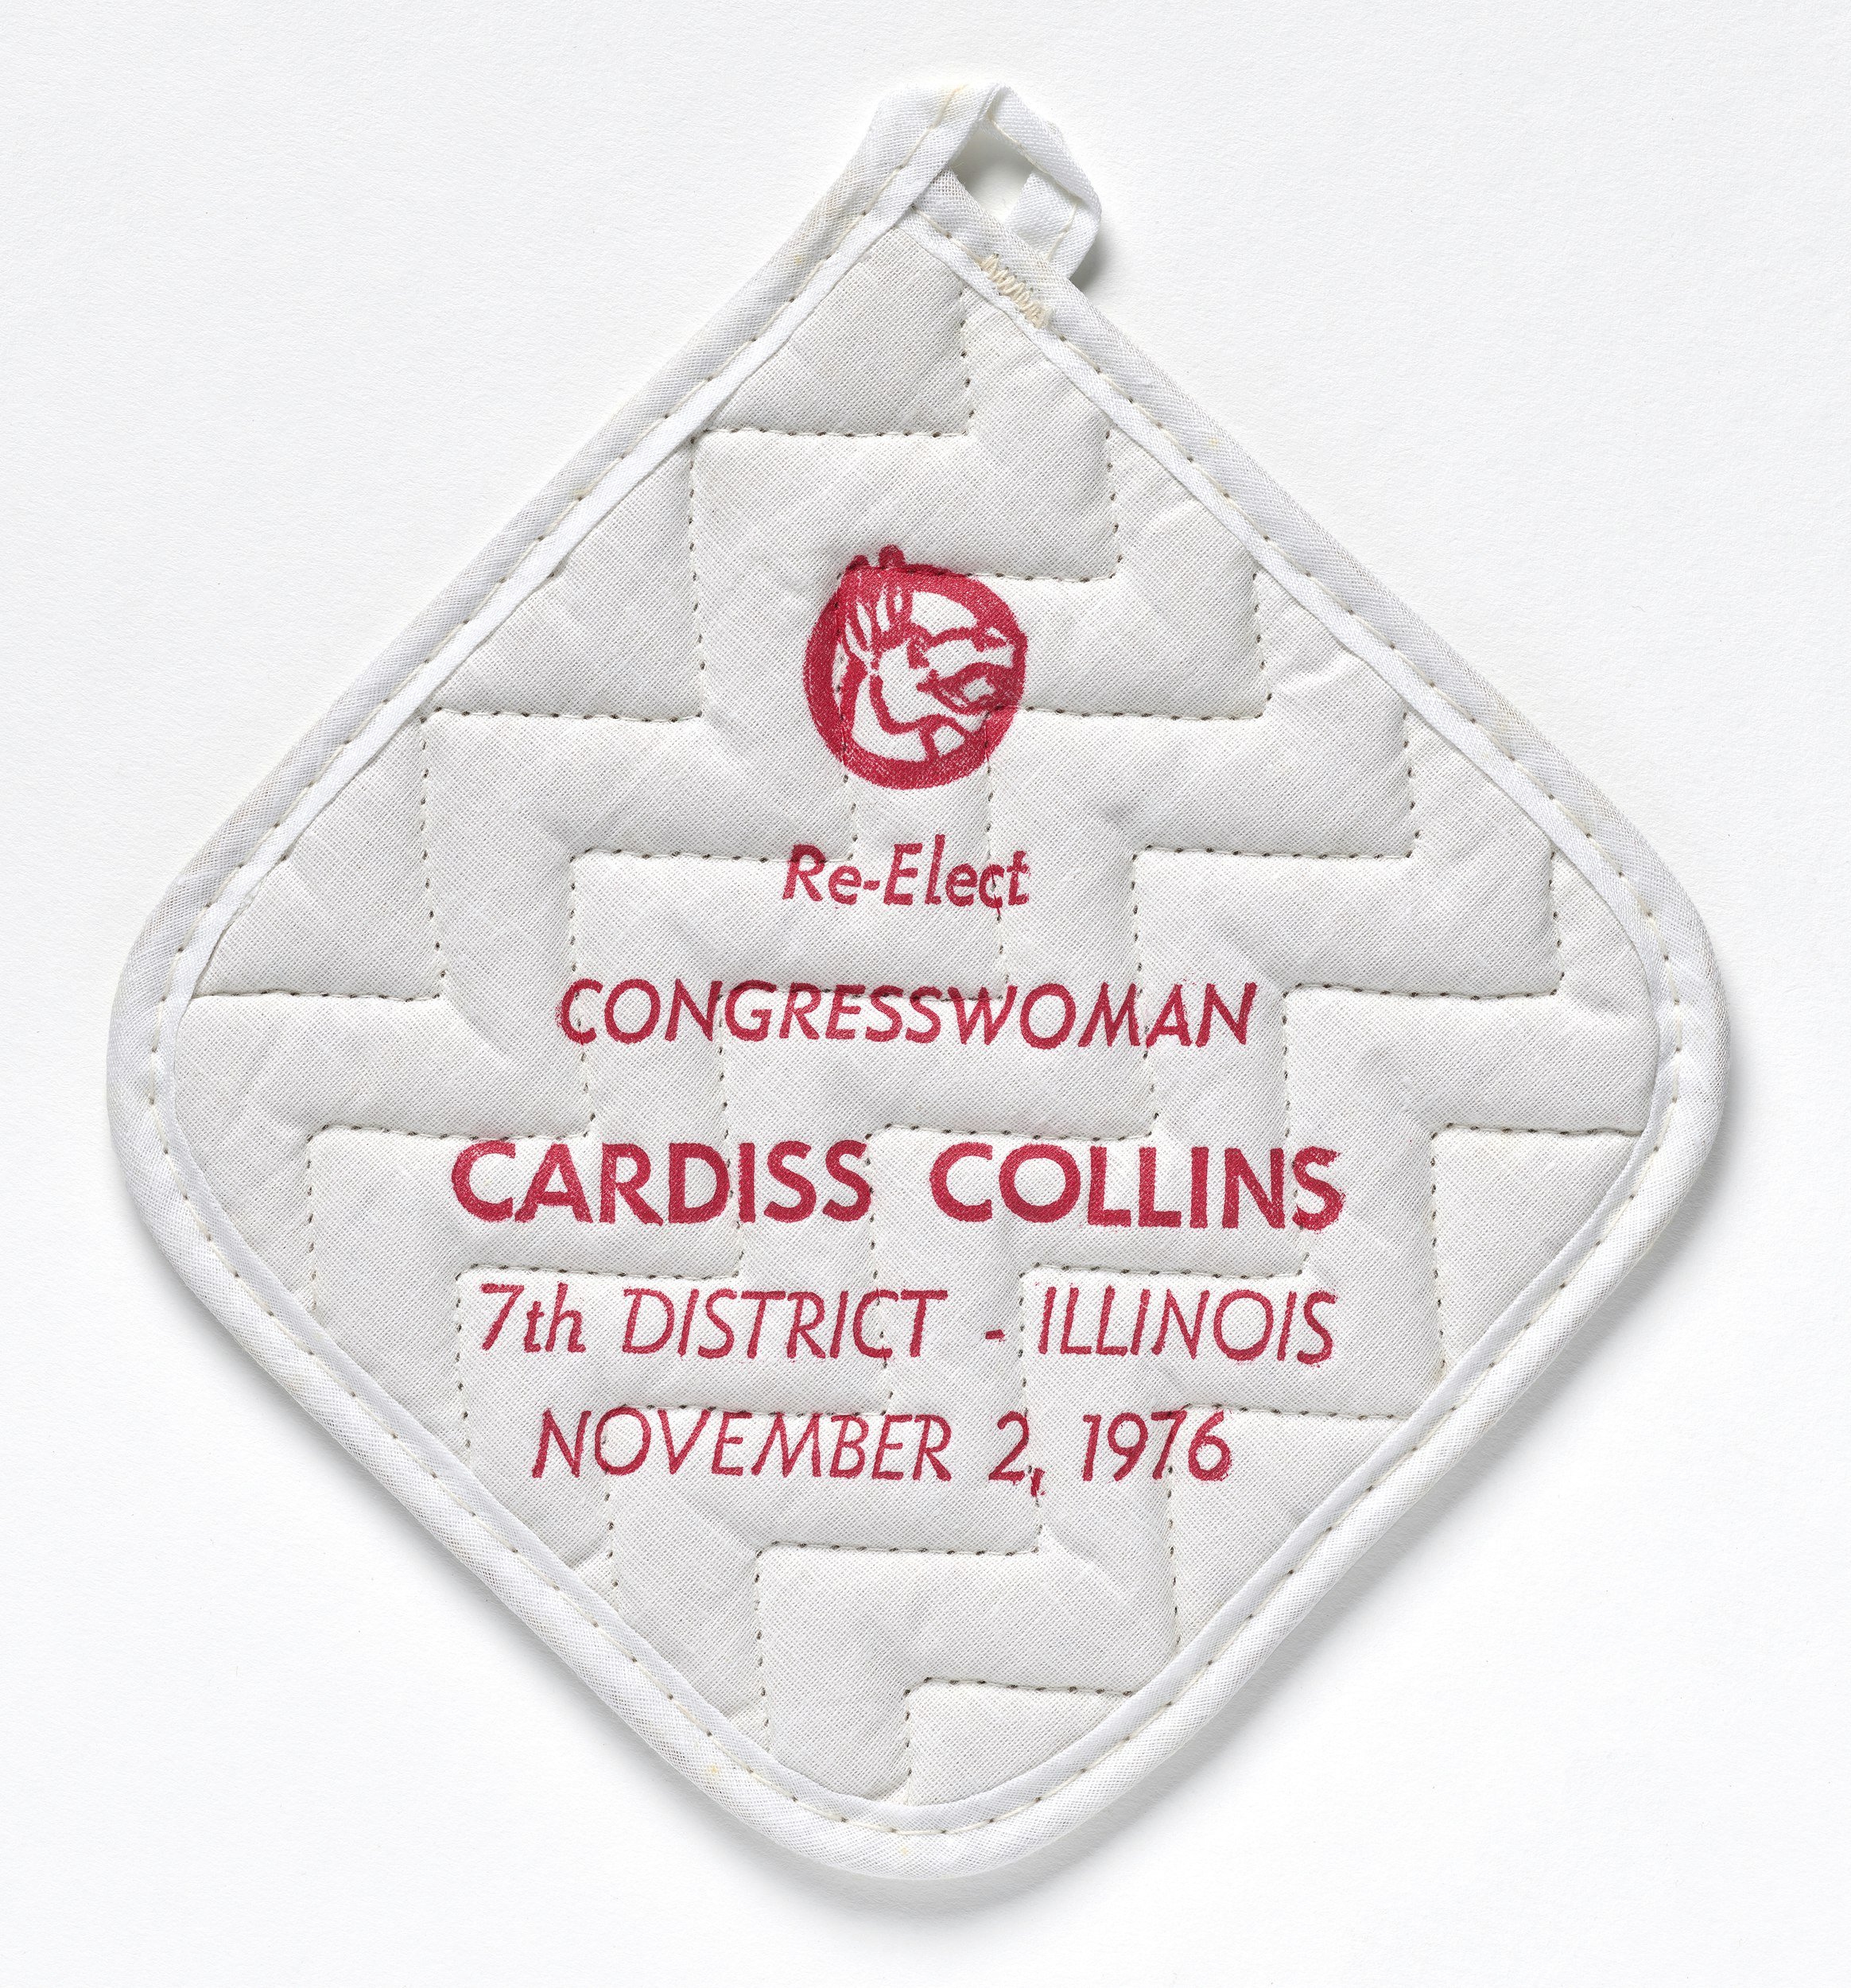 Square white with brown floral back and red text reading, "Re-Elect Congresswoman Cardiss Collins 7th Discrict-Illinois, November 2, 1976" under image of smiling donkey inside a circle.